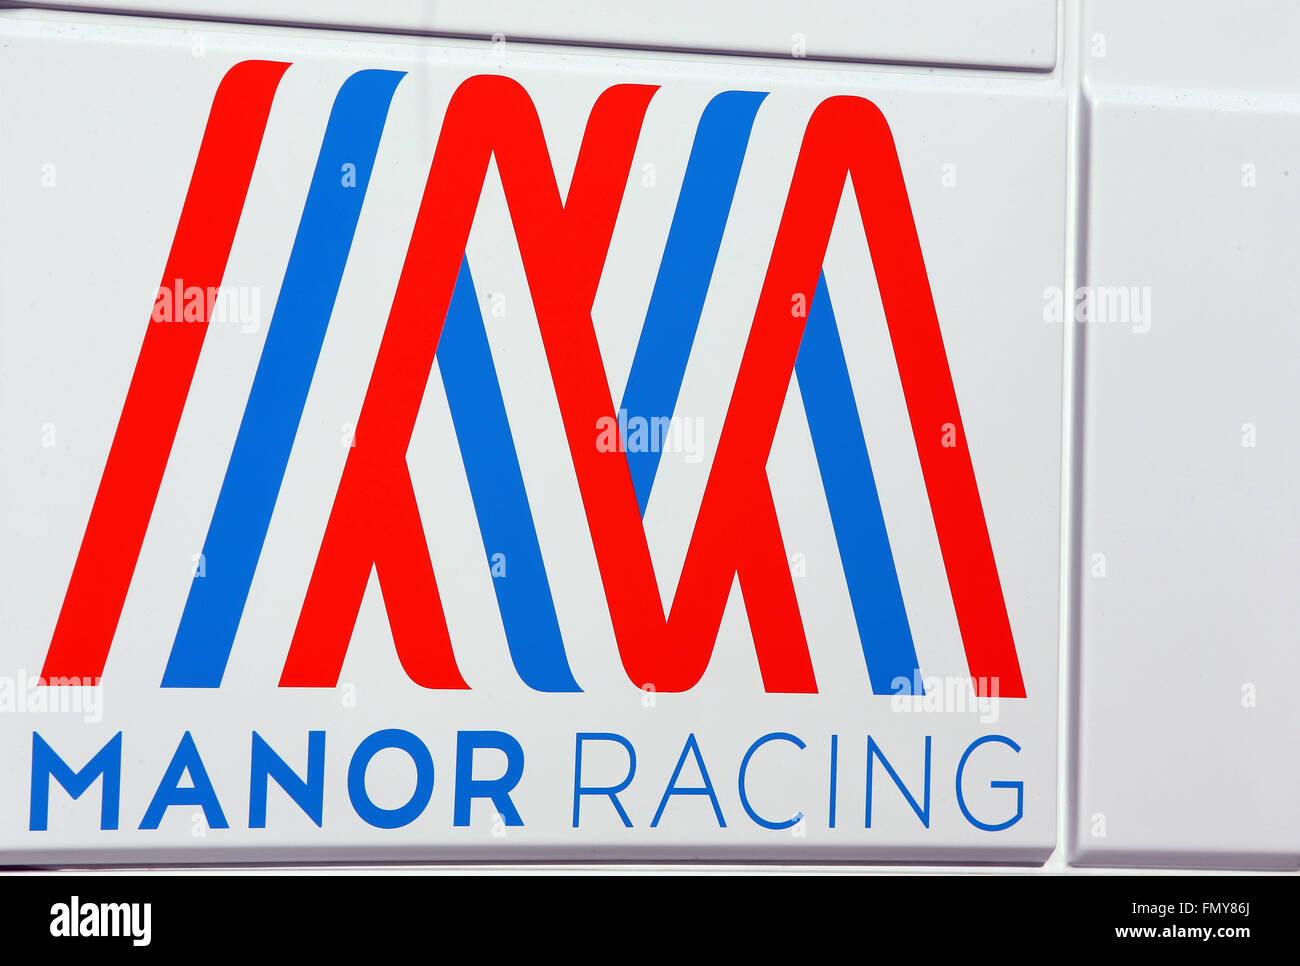 The motorhome of Manor racing seen during the training session for the upcoming Formula One season at the Circuit de Barcelona - Catalunya in Barcelona, Spain, 23 February 2016. Photo: Jens Buettner/dpa Stock Photo